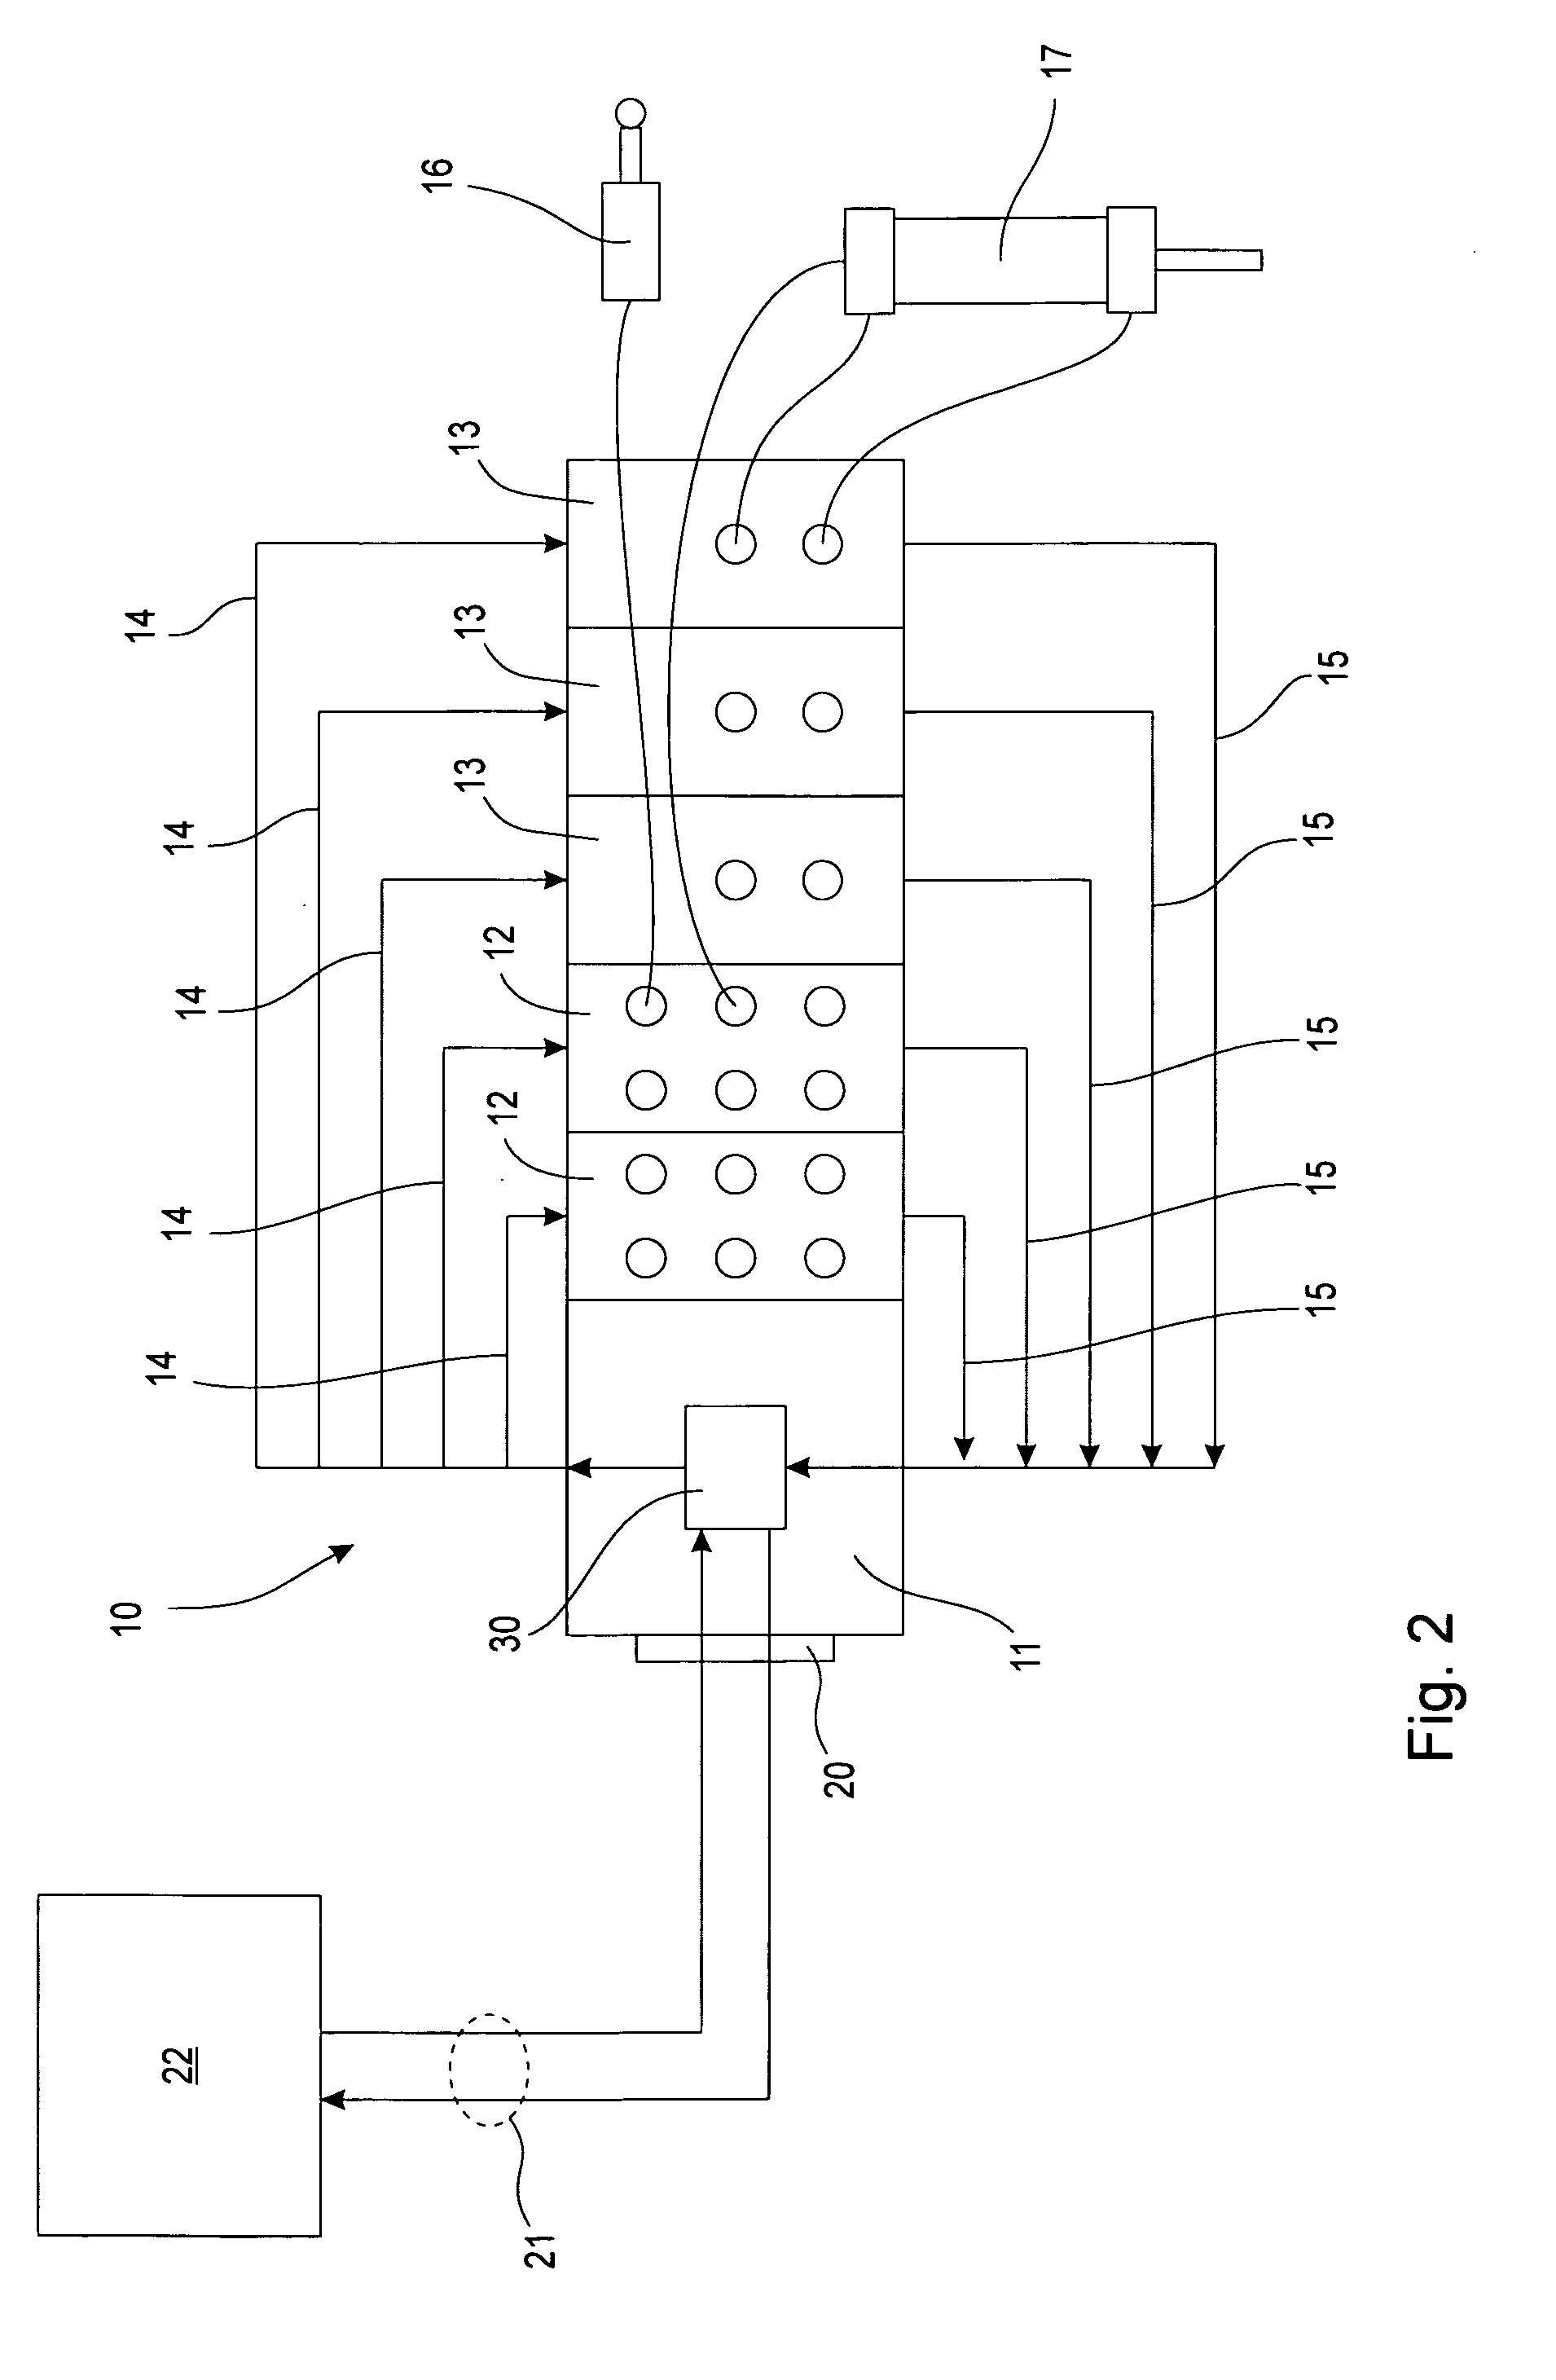 Signal processing system and method for processing signals in a bus node